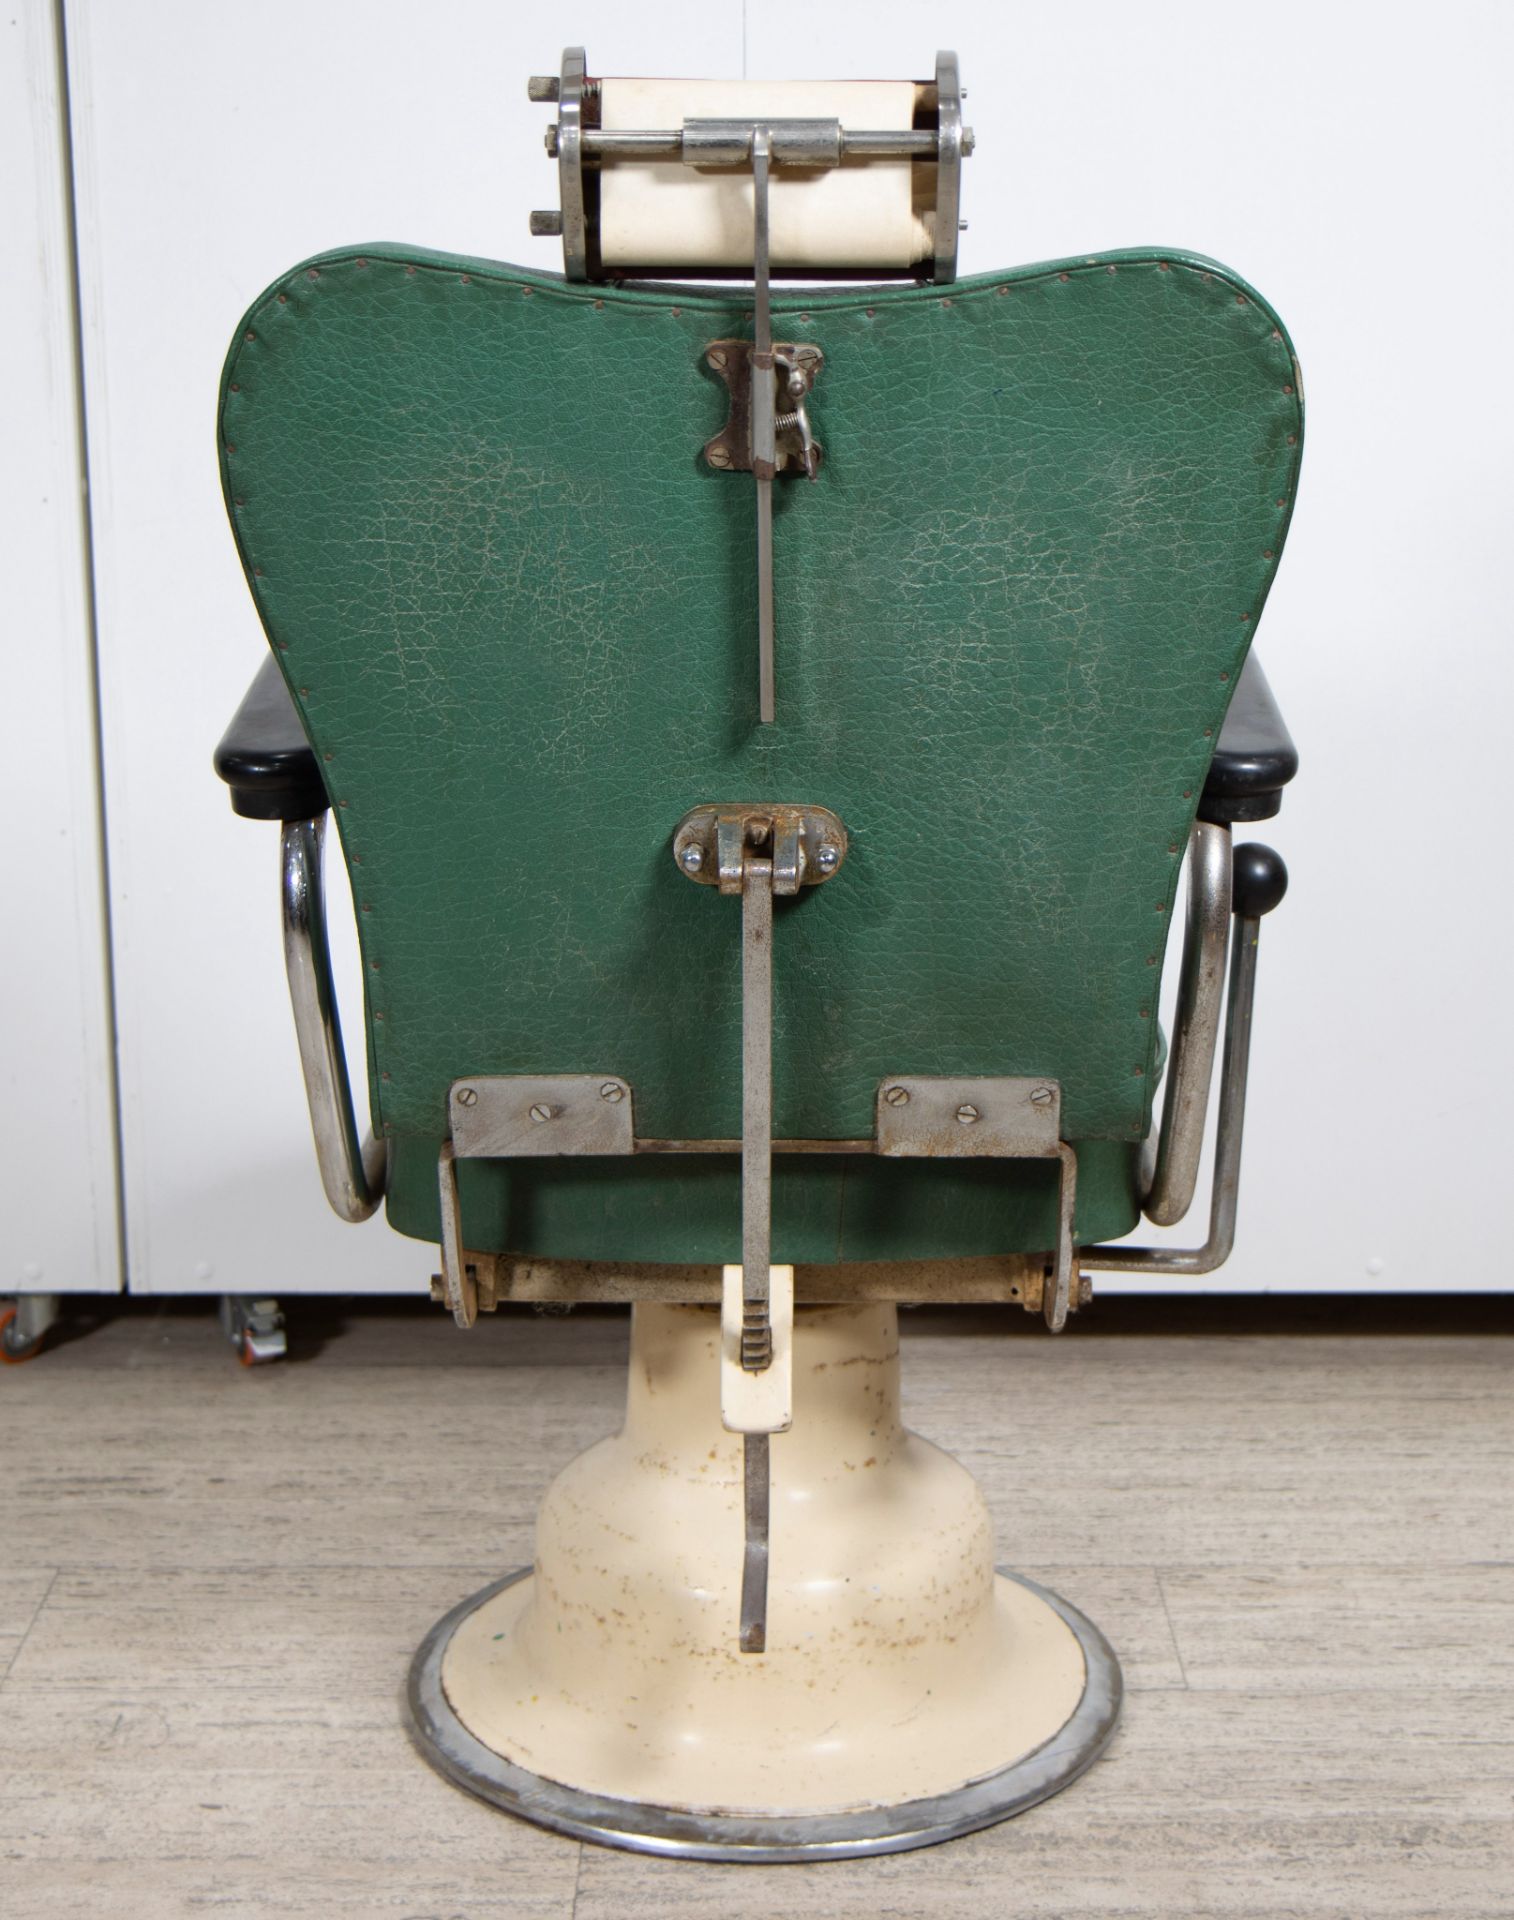 Vintage barber chair from the 1970s - Bild 3 aus 3